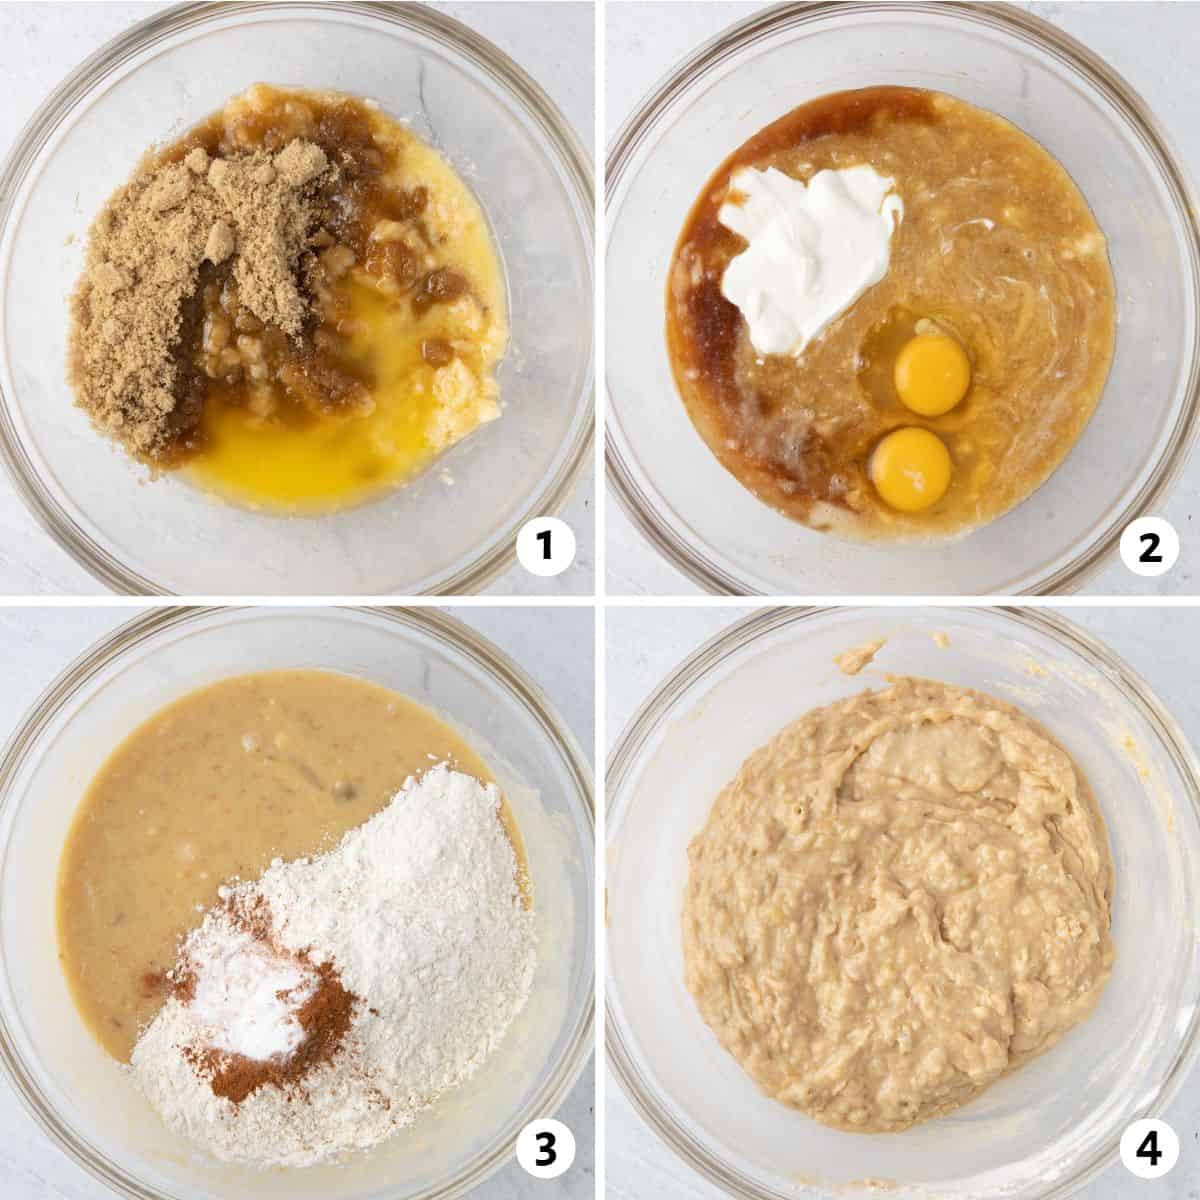 4 image collage making batter in a bowl: 1- mashed bananas, brown sugar, and melted butter in bowl, 2- eggs, yogurt, and vanilla added to mixture, 3-flour, cinnamon and baking powdered added on top, 4- bread batter after combining.